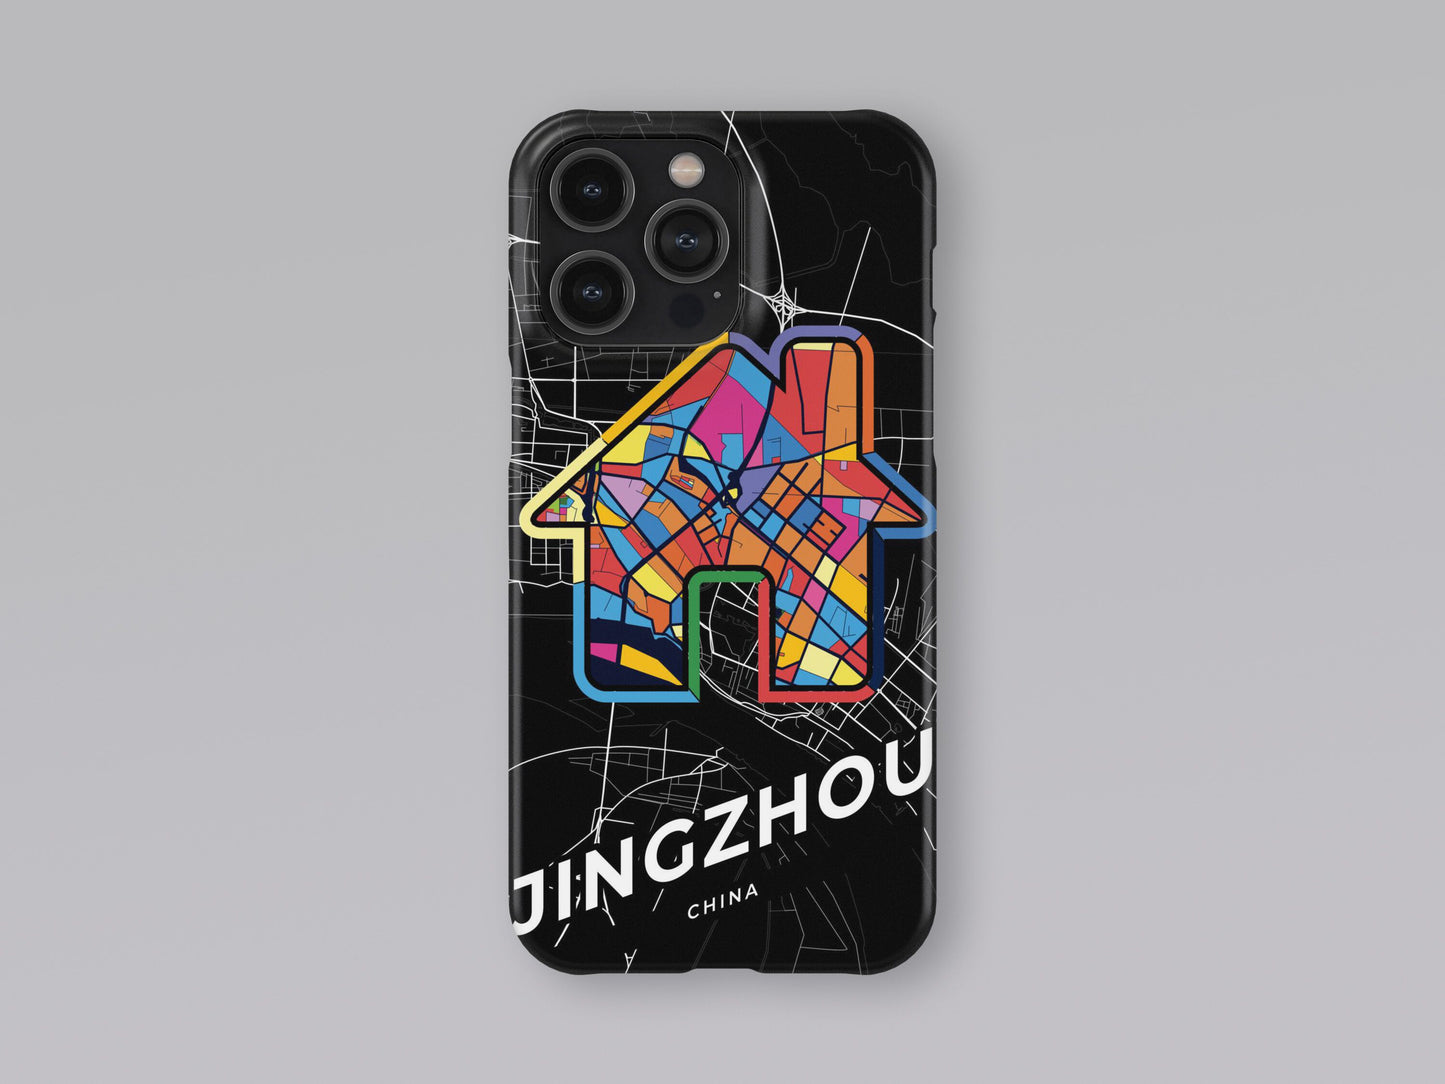 Jingzhou China slim phone case with colorful icon. Birthday, wedding or housewarming gift. Couple match cases. 3